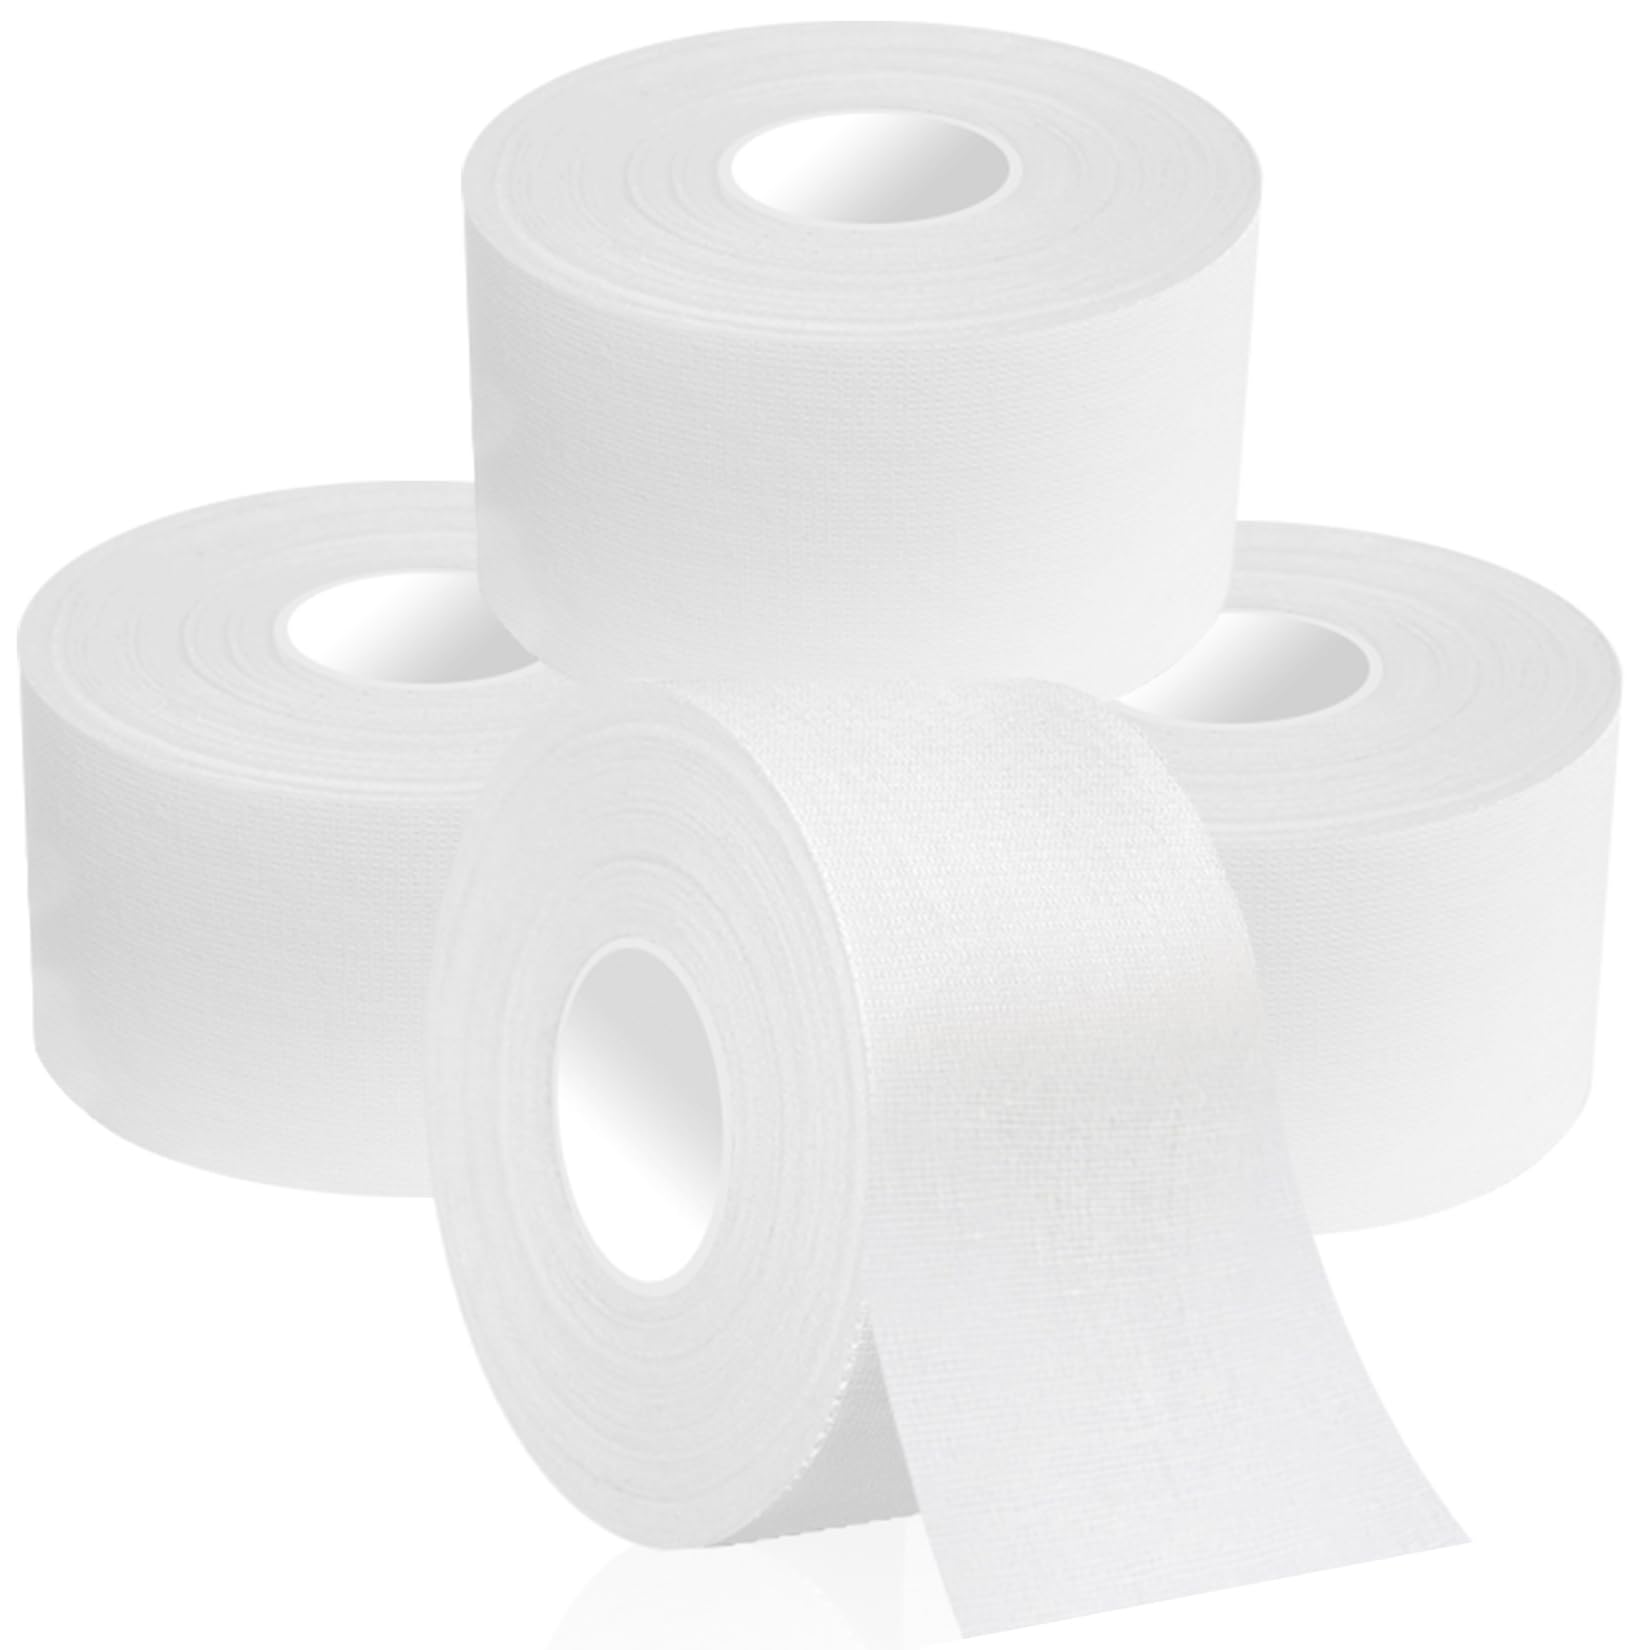 Dimora 4-Rolls White Athletic Sports Tape Very Strong Tape for Athlete & Sport Trainers & First Aid Injury Wrap, Perfect for Fingers Ankles Wrist on Bat, Hockey Stick, 4 Rolls, Total 1.5inch X 60Yds